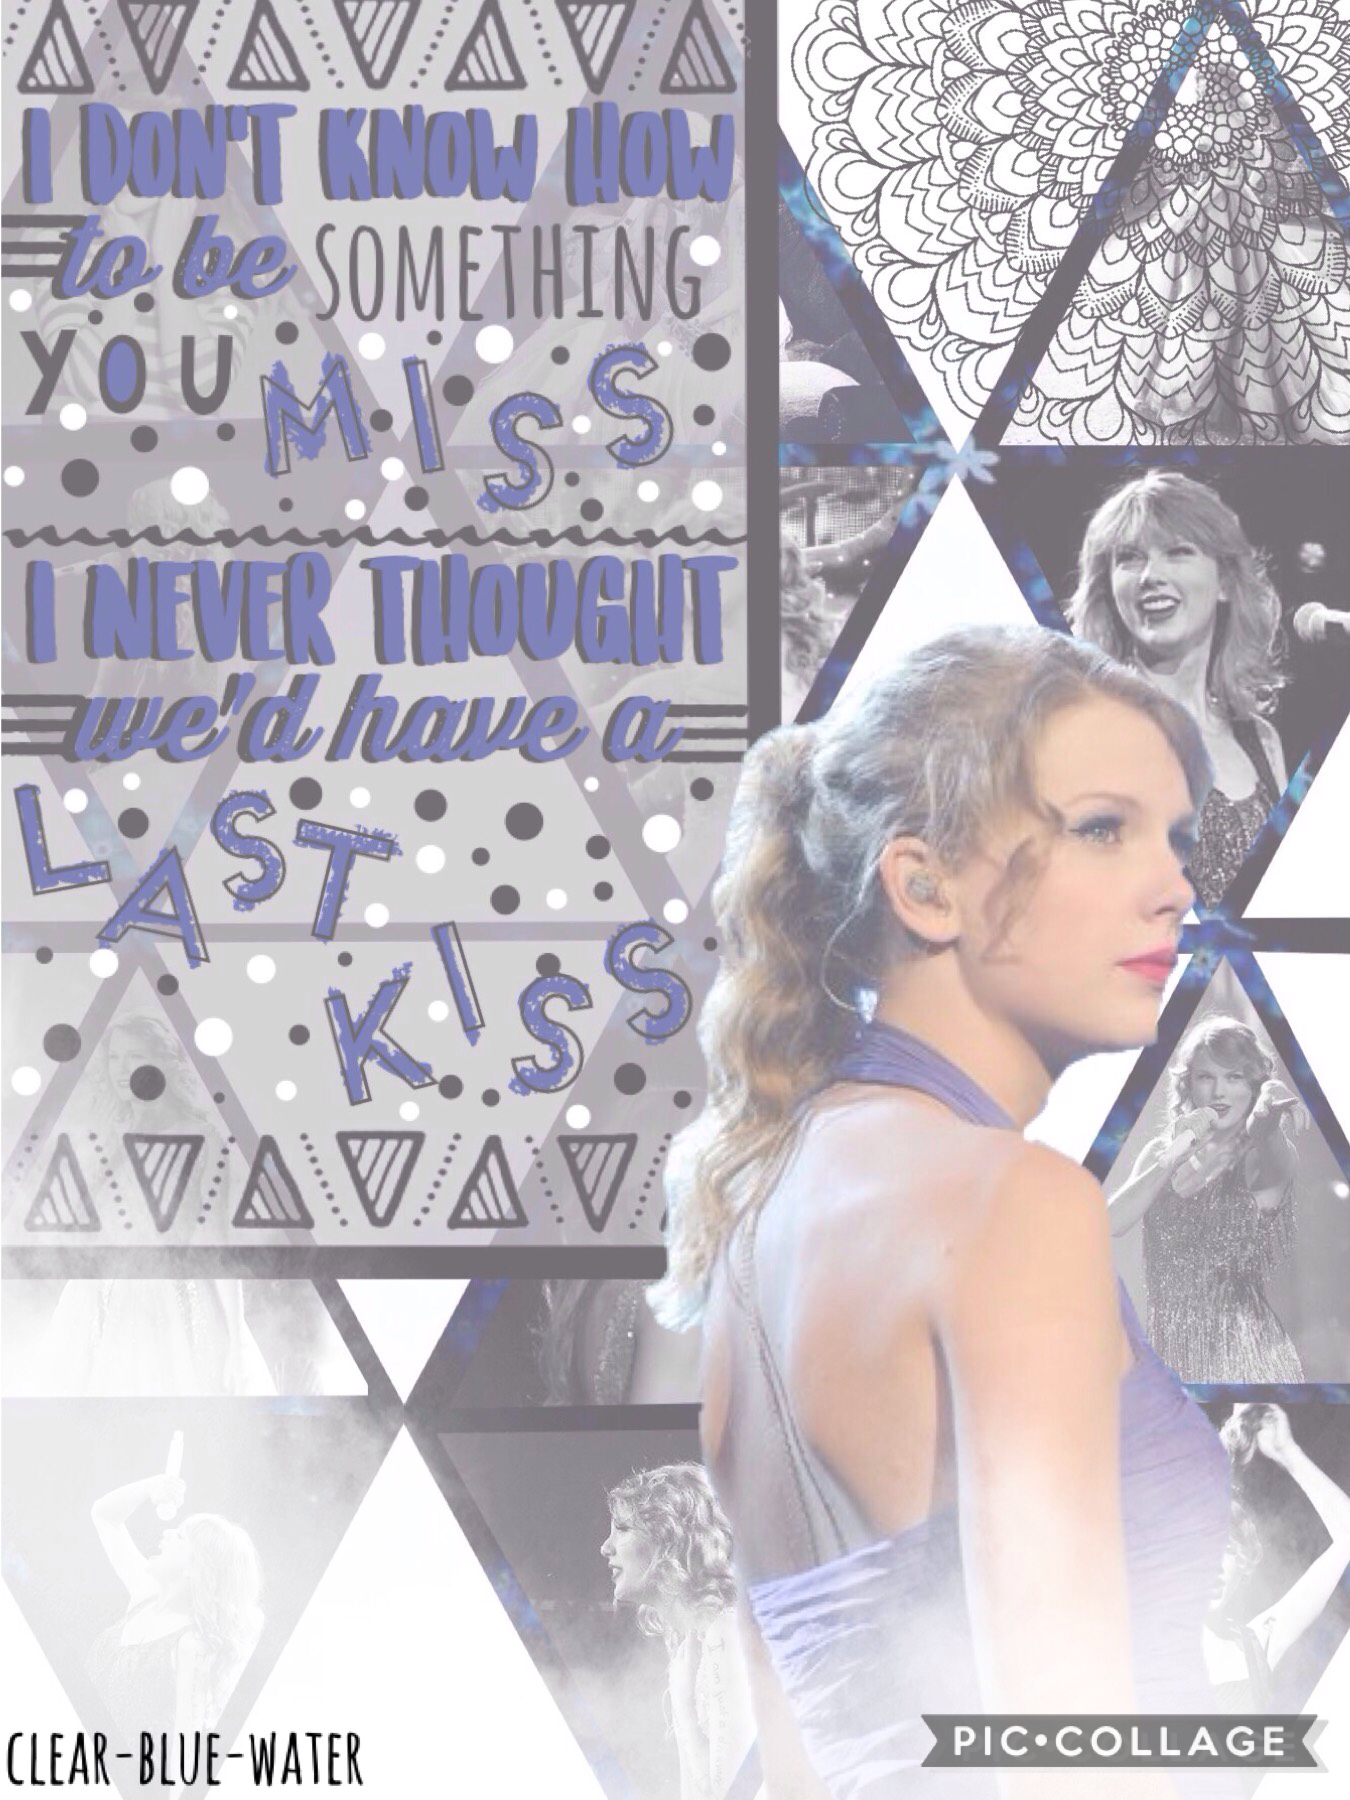 💙T A P💙
Made this for Rhianna's games
QOTD: Last Kiss or Sparks Fly
AOTD: ummmmmmm, so hard but maybe Sparks Fly